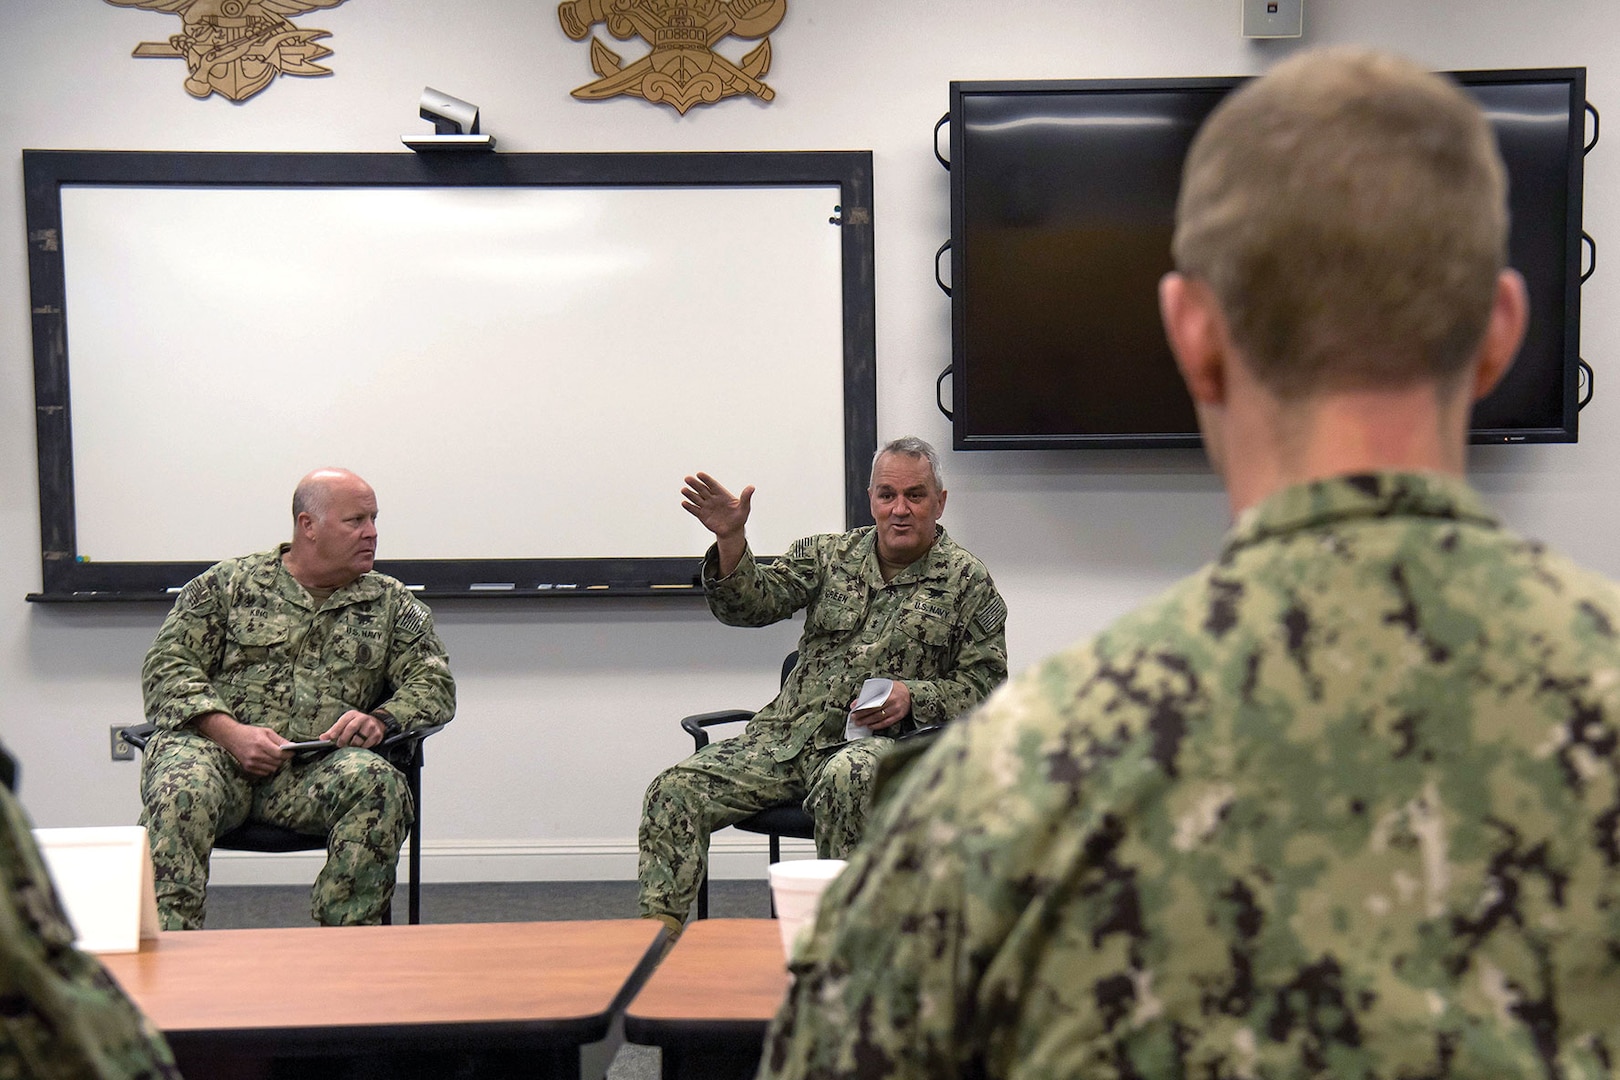 Rear Admiral Collin Green, commander, Naval Special Warfare Command (right), and Force Master Chief William King speak to junior officers and senior enlisted leaders